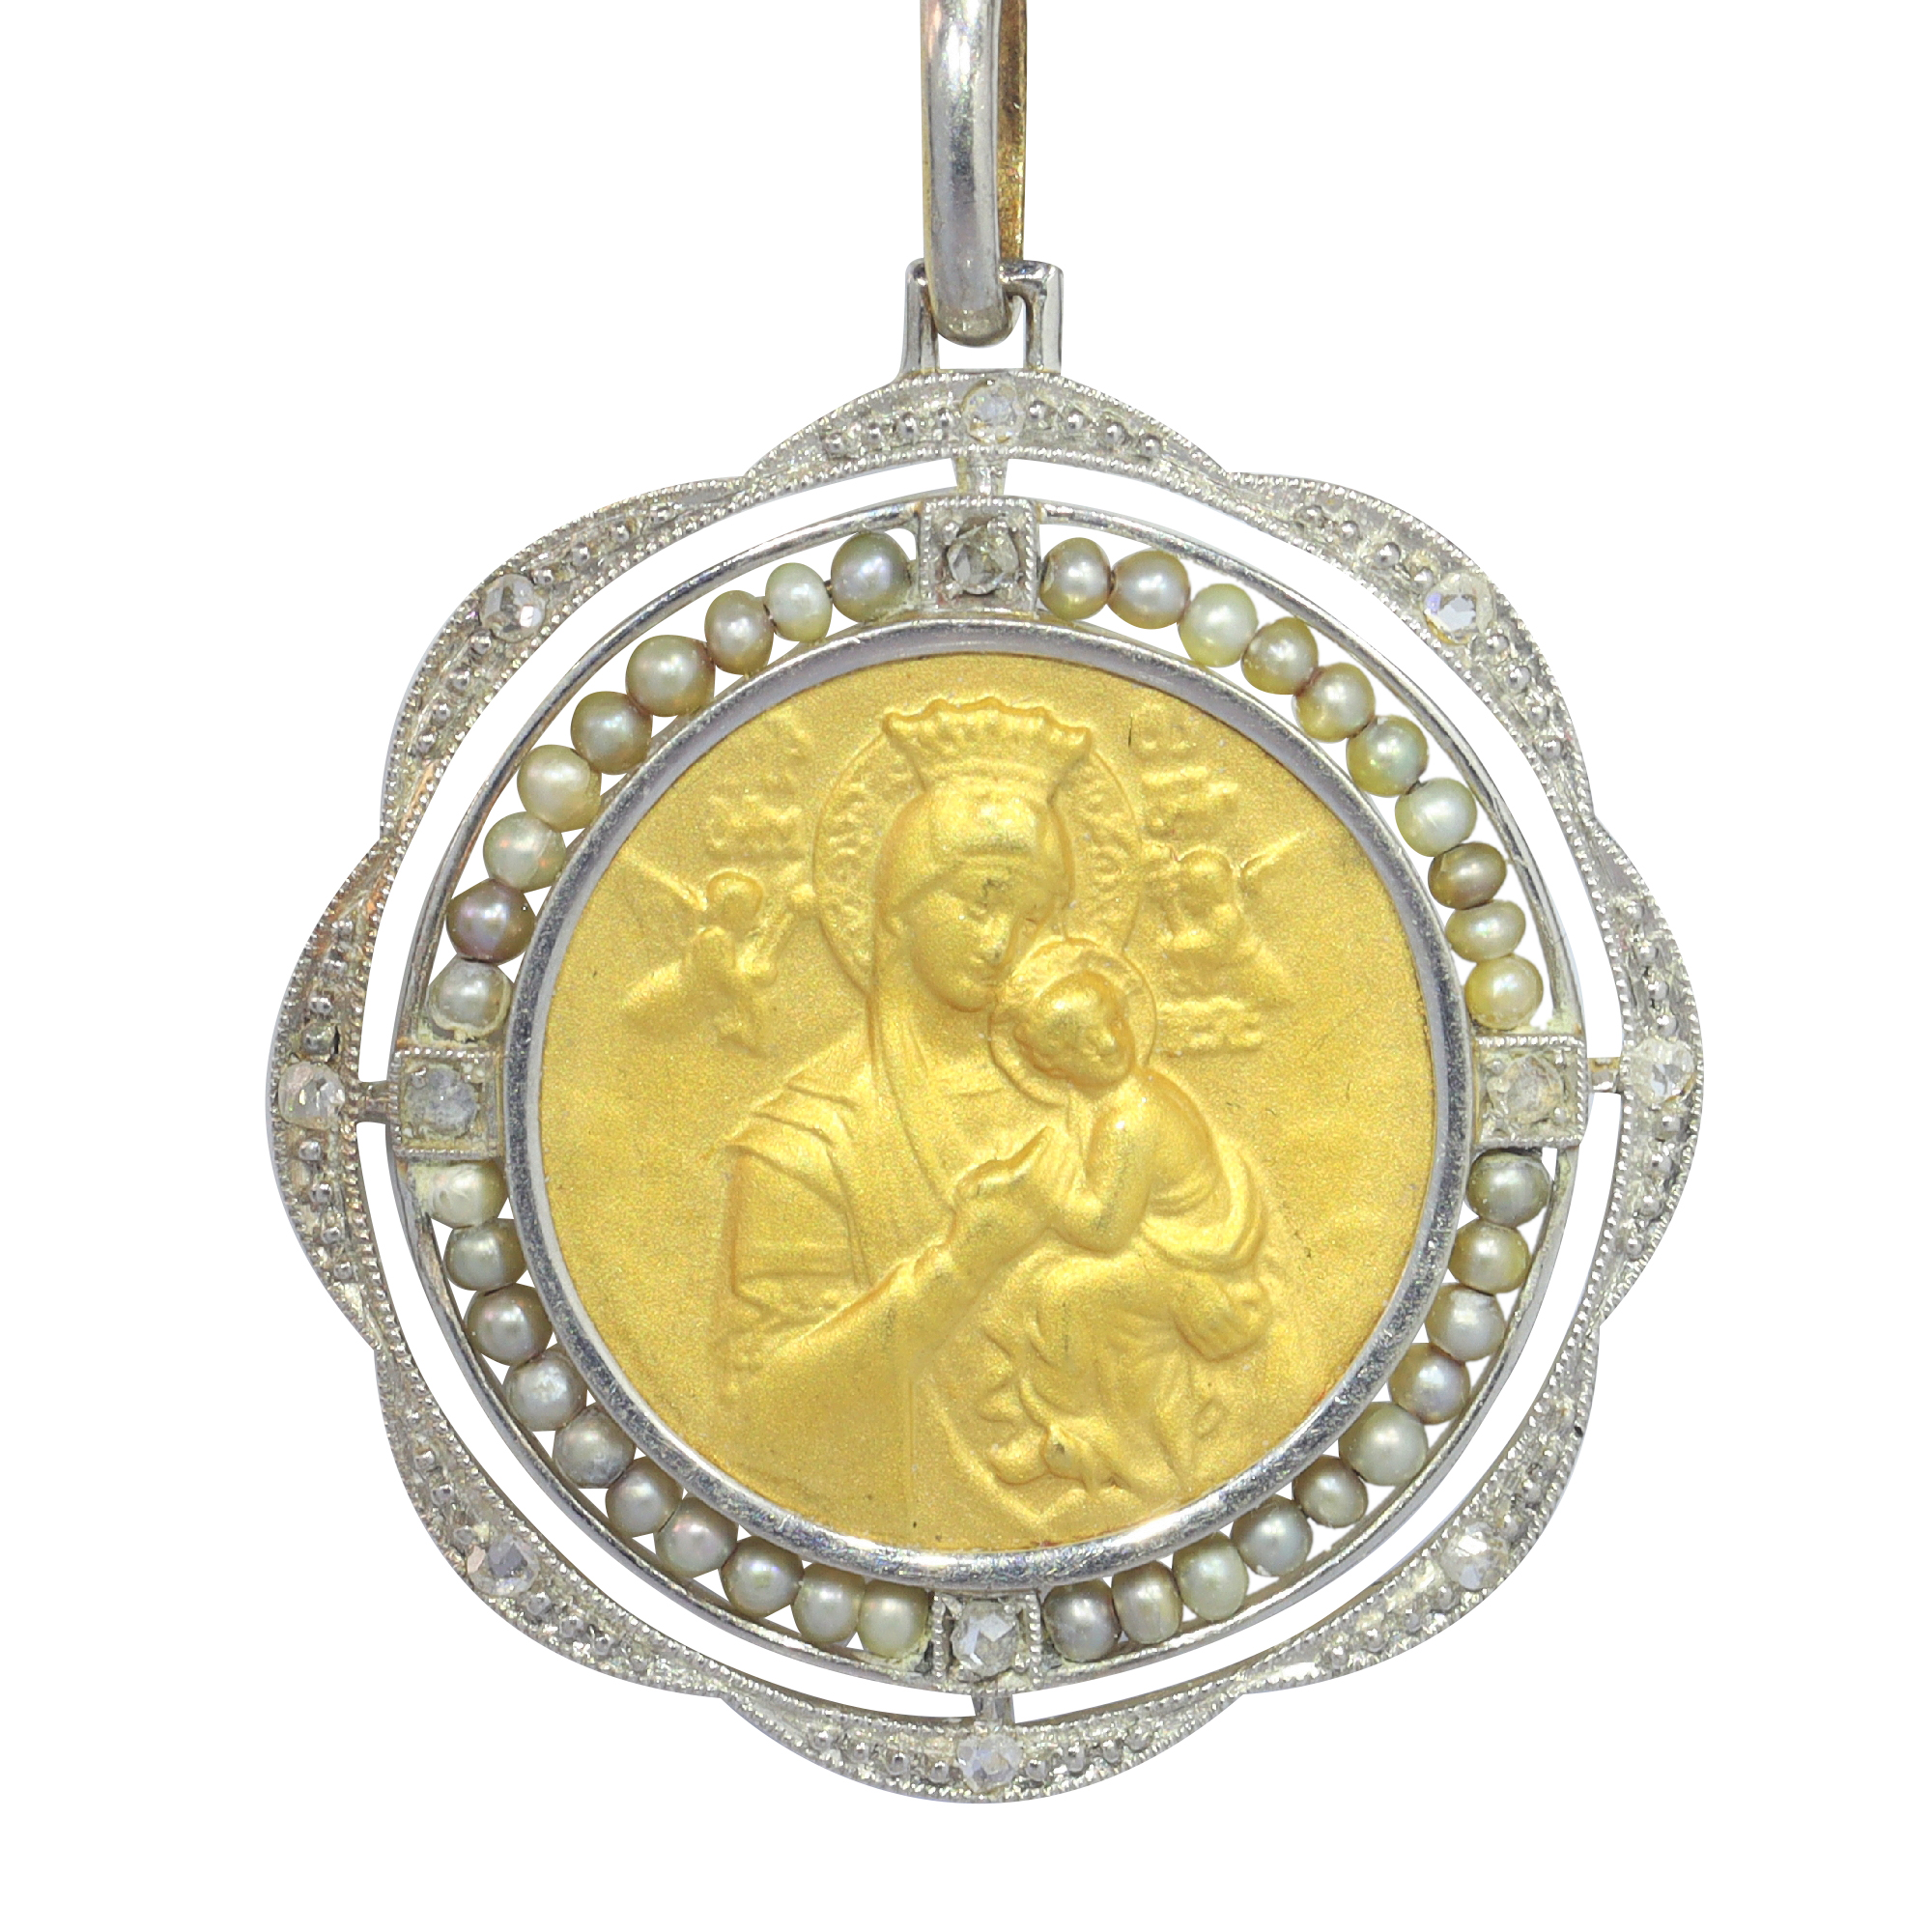 Vintage antique 1910's Edwardian - Art Deco 18K gold medal set with diamonds and pearls Mother Mary Our Lady of Perpetual Help